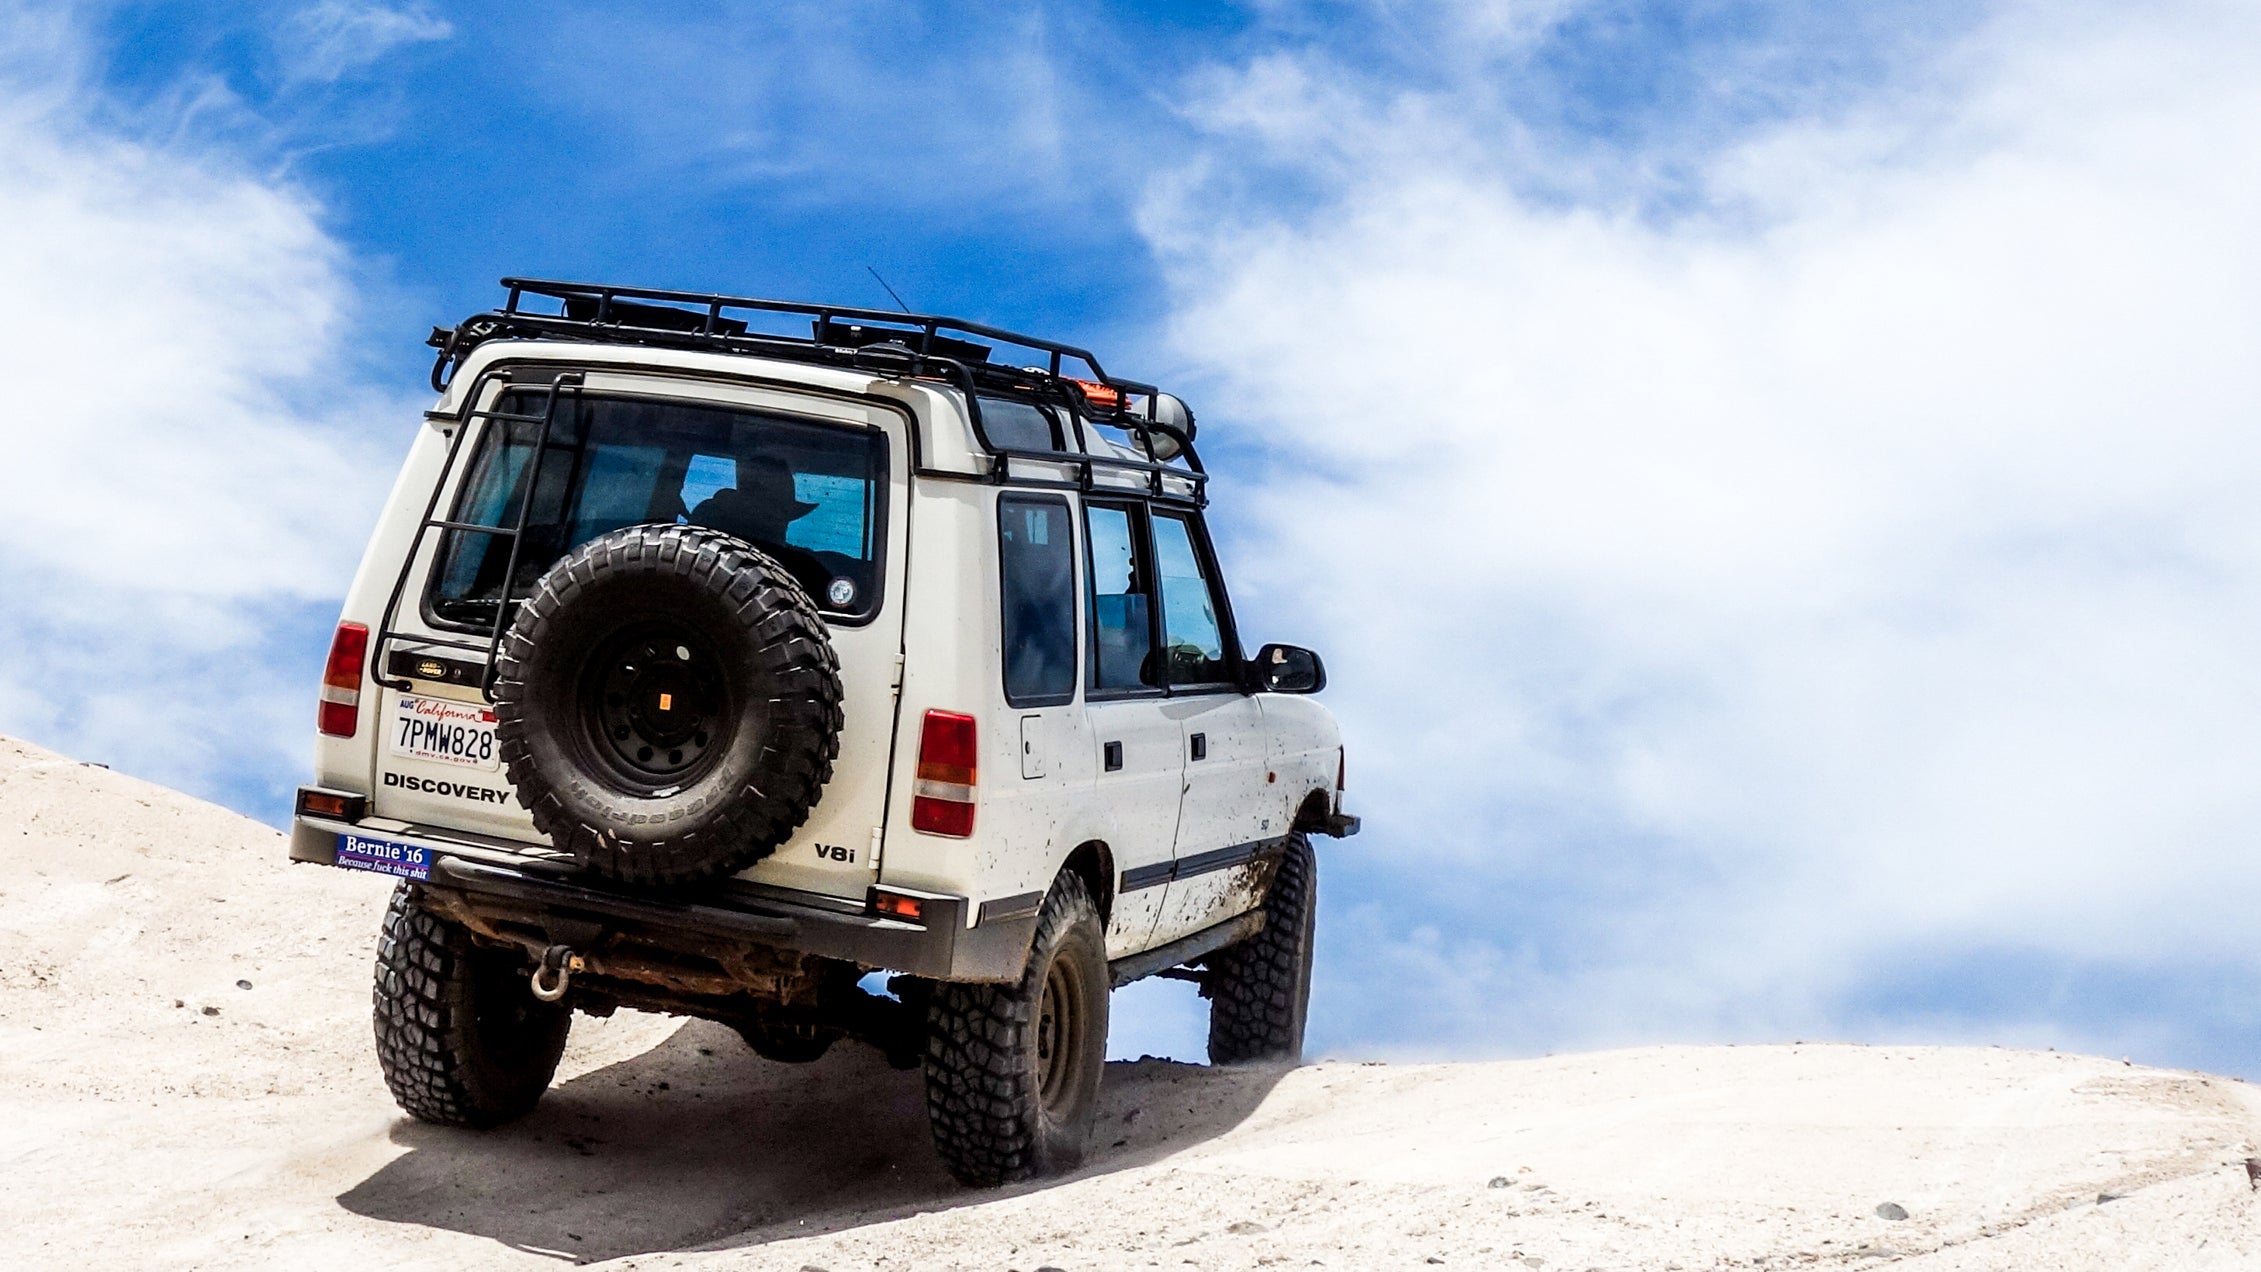 I Took My Unreliable Land Rover Off-Roading, And It Down Almost Immediately